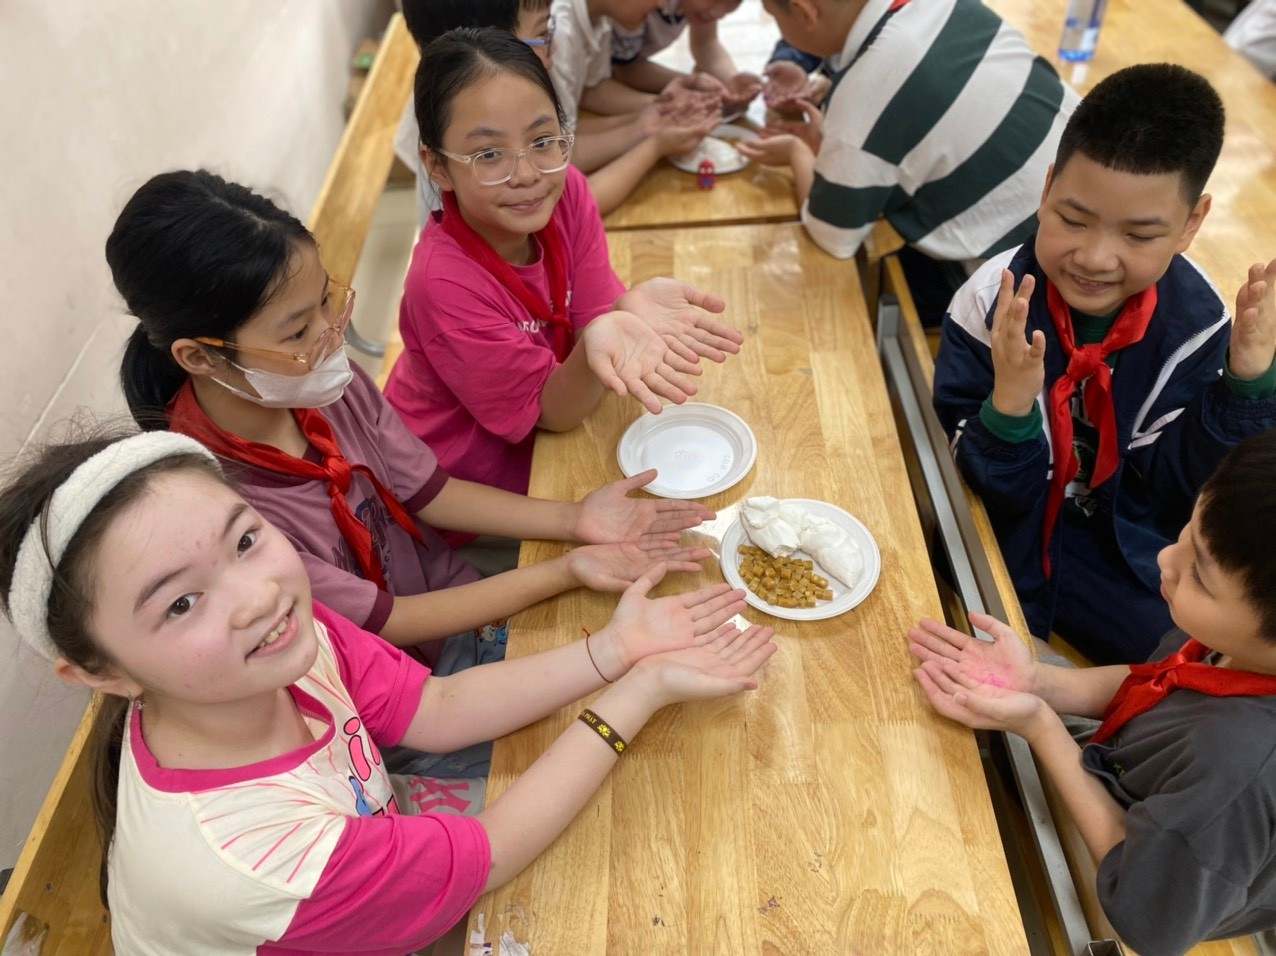 A group of children sitting at a table with their hands on a plate

Description automatically generated